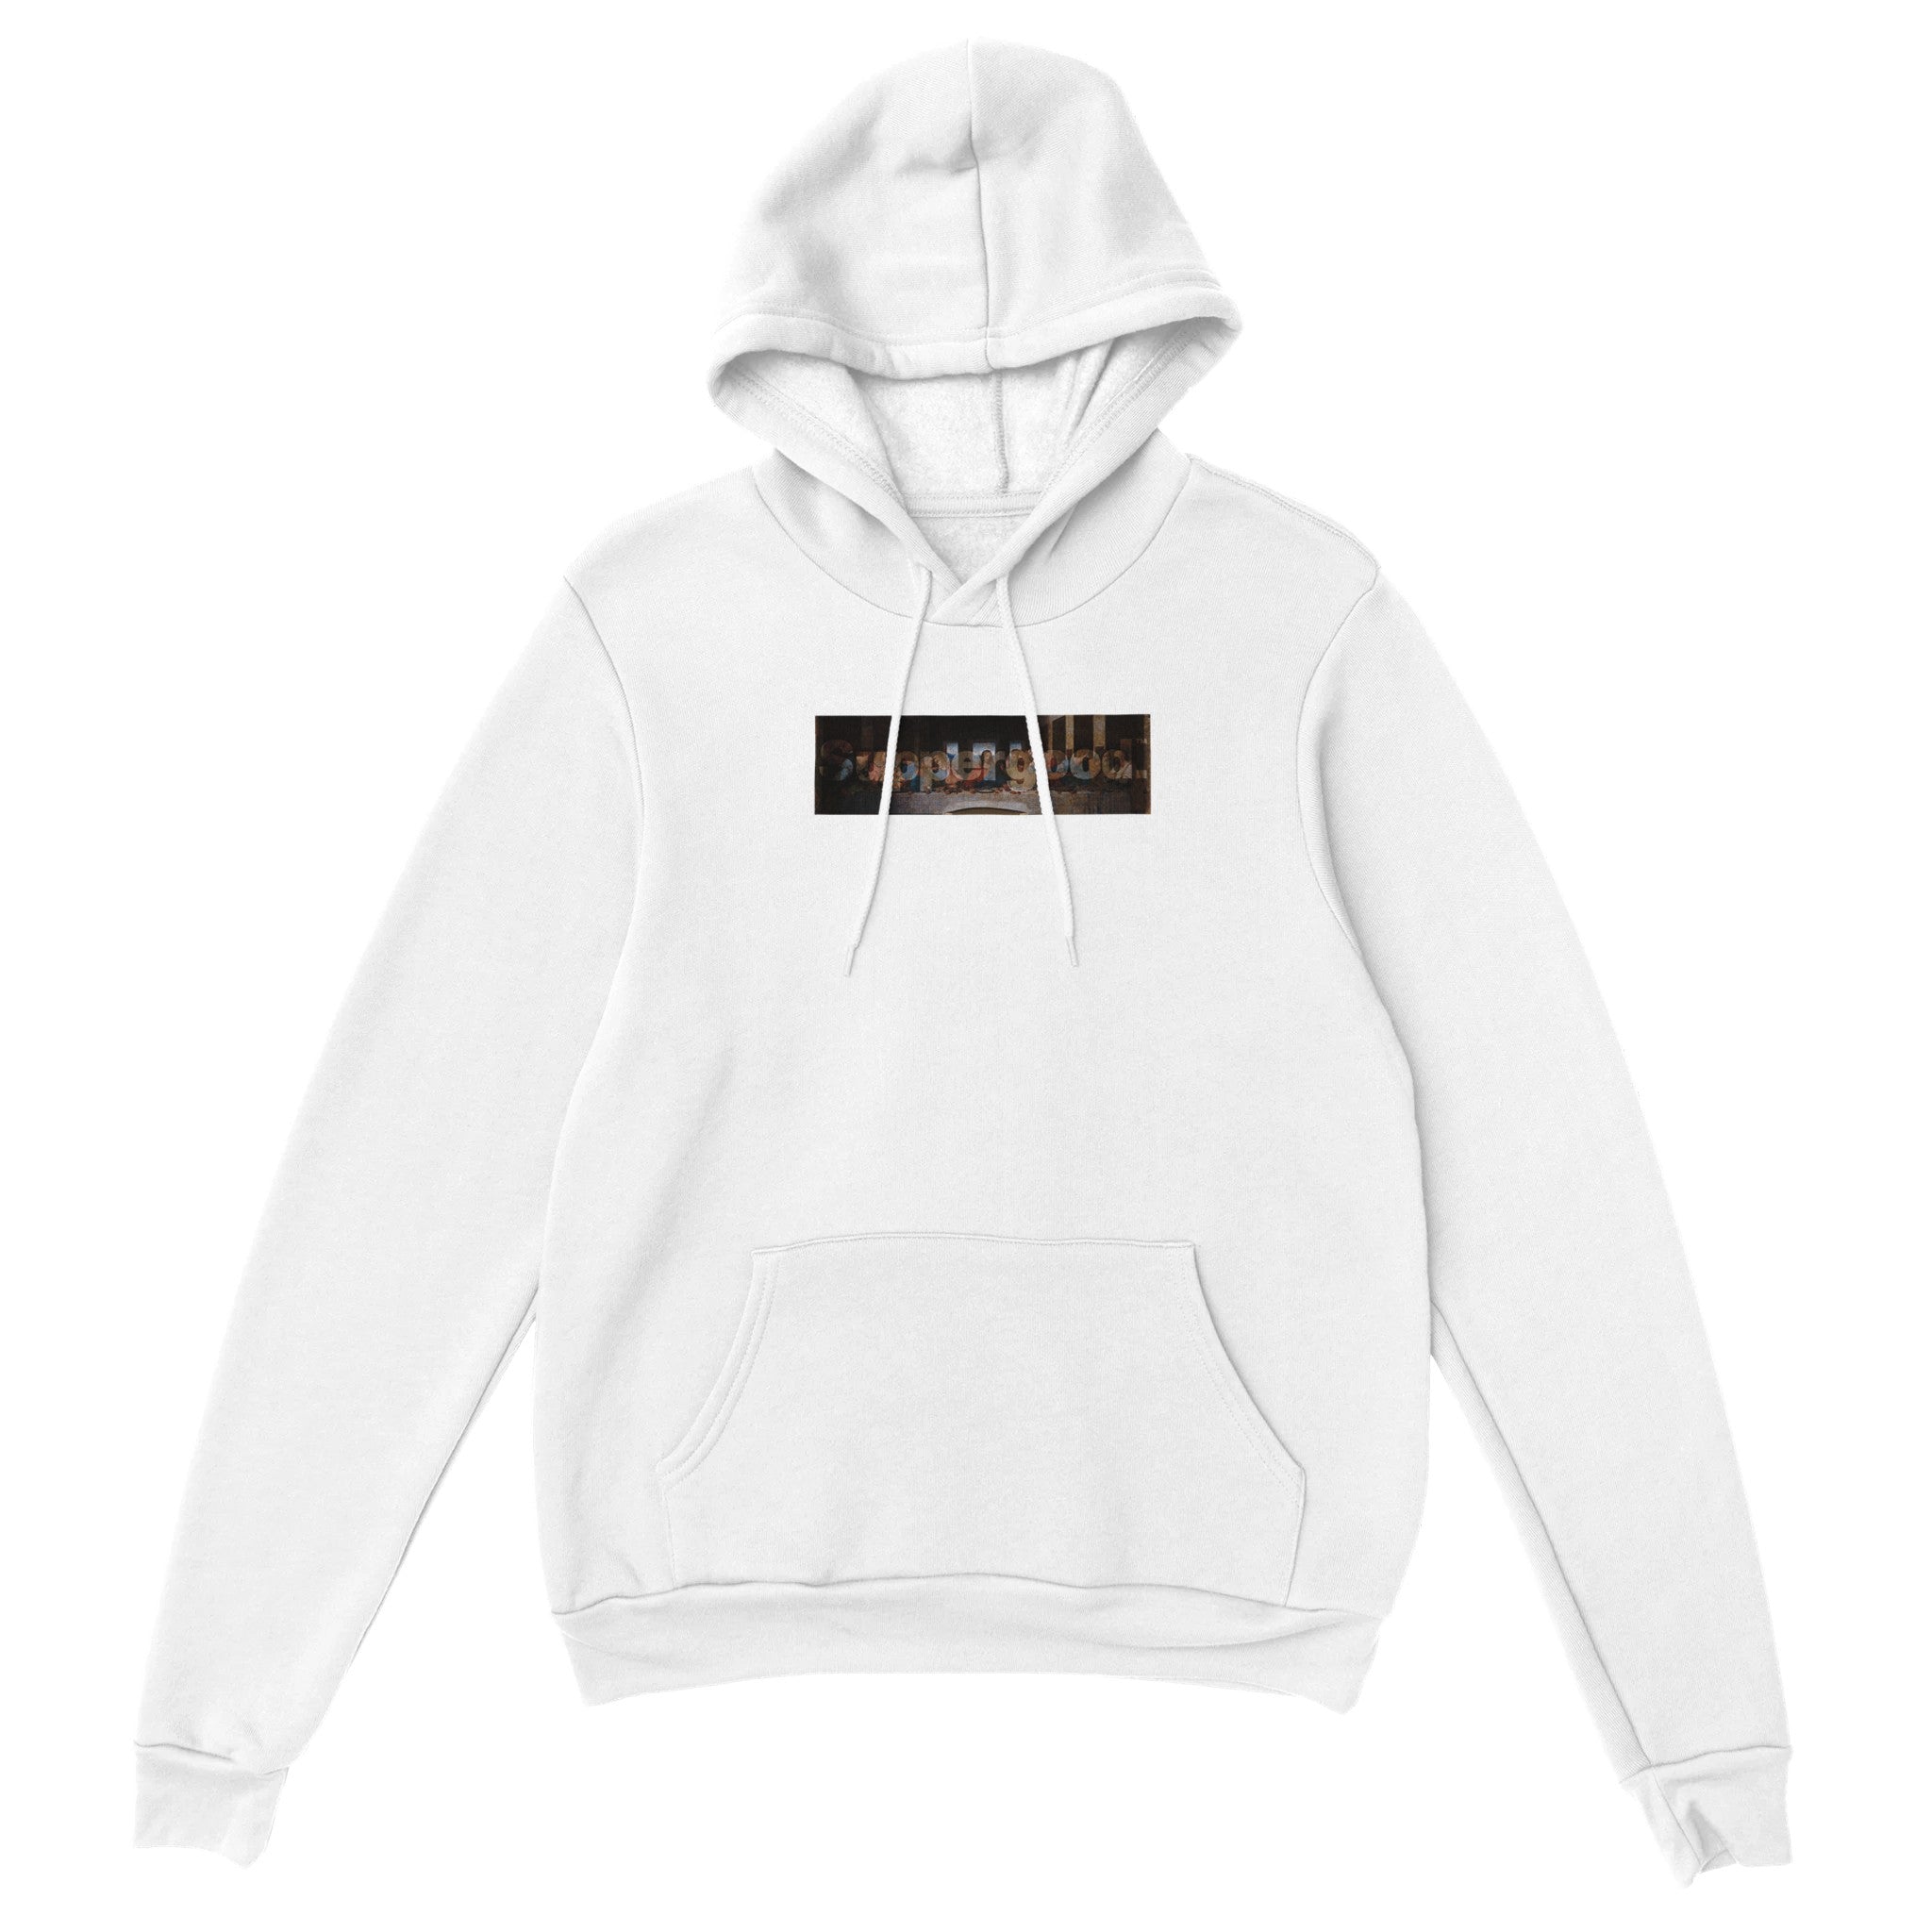 The Suppergood Box Logo Hoodie by Supergood.-Supergood.